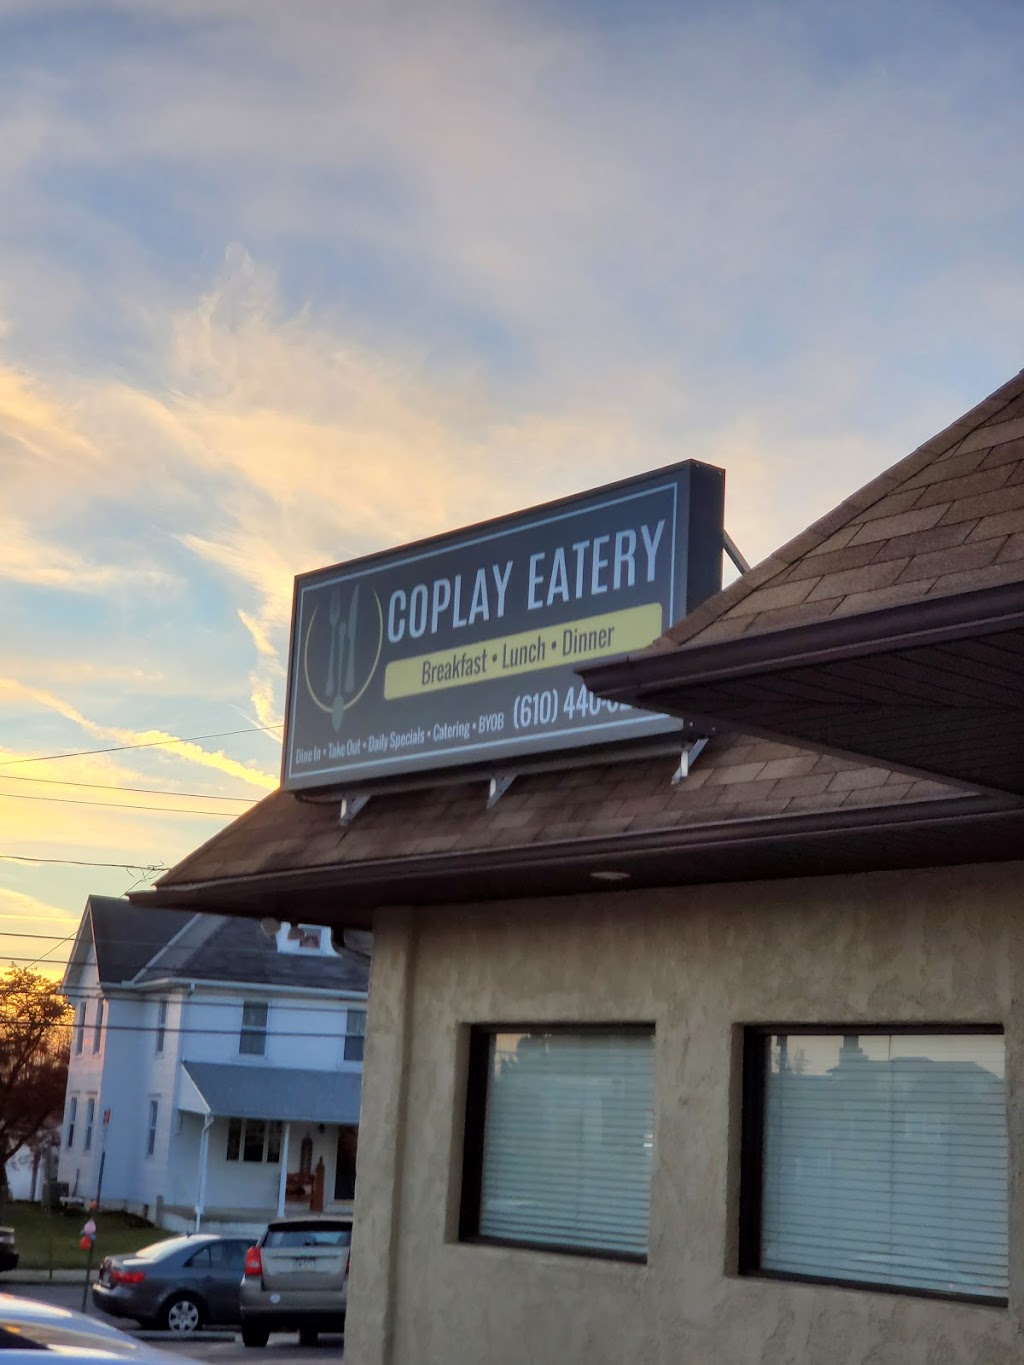 Coplay Eatery | restaurant | 1214 Chestnut St, Coplay, PA 18037, USA | 6104400293 OR +1 610-440-0293